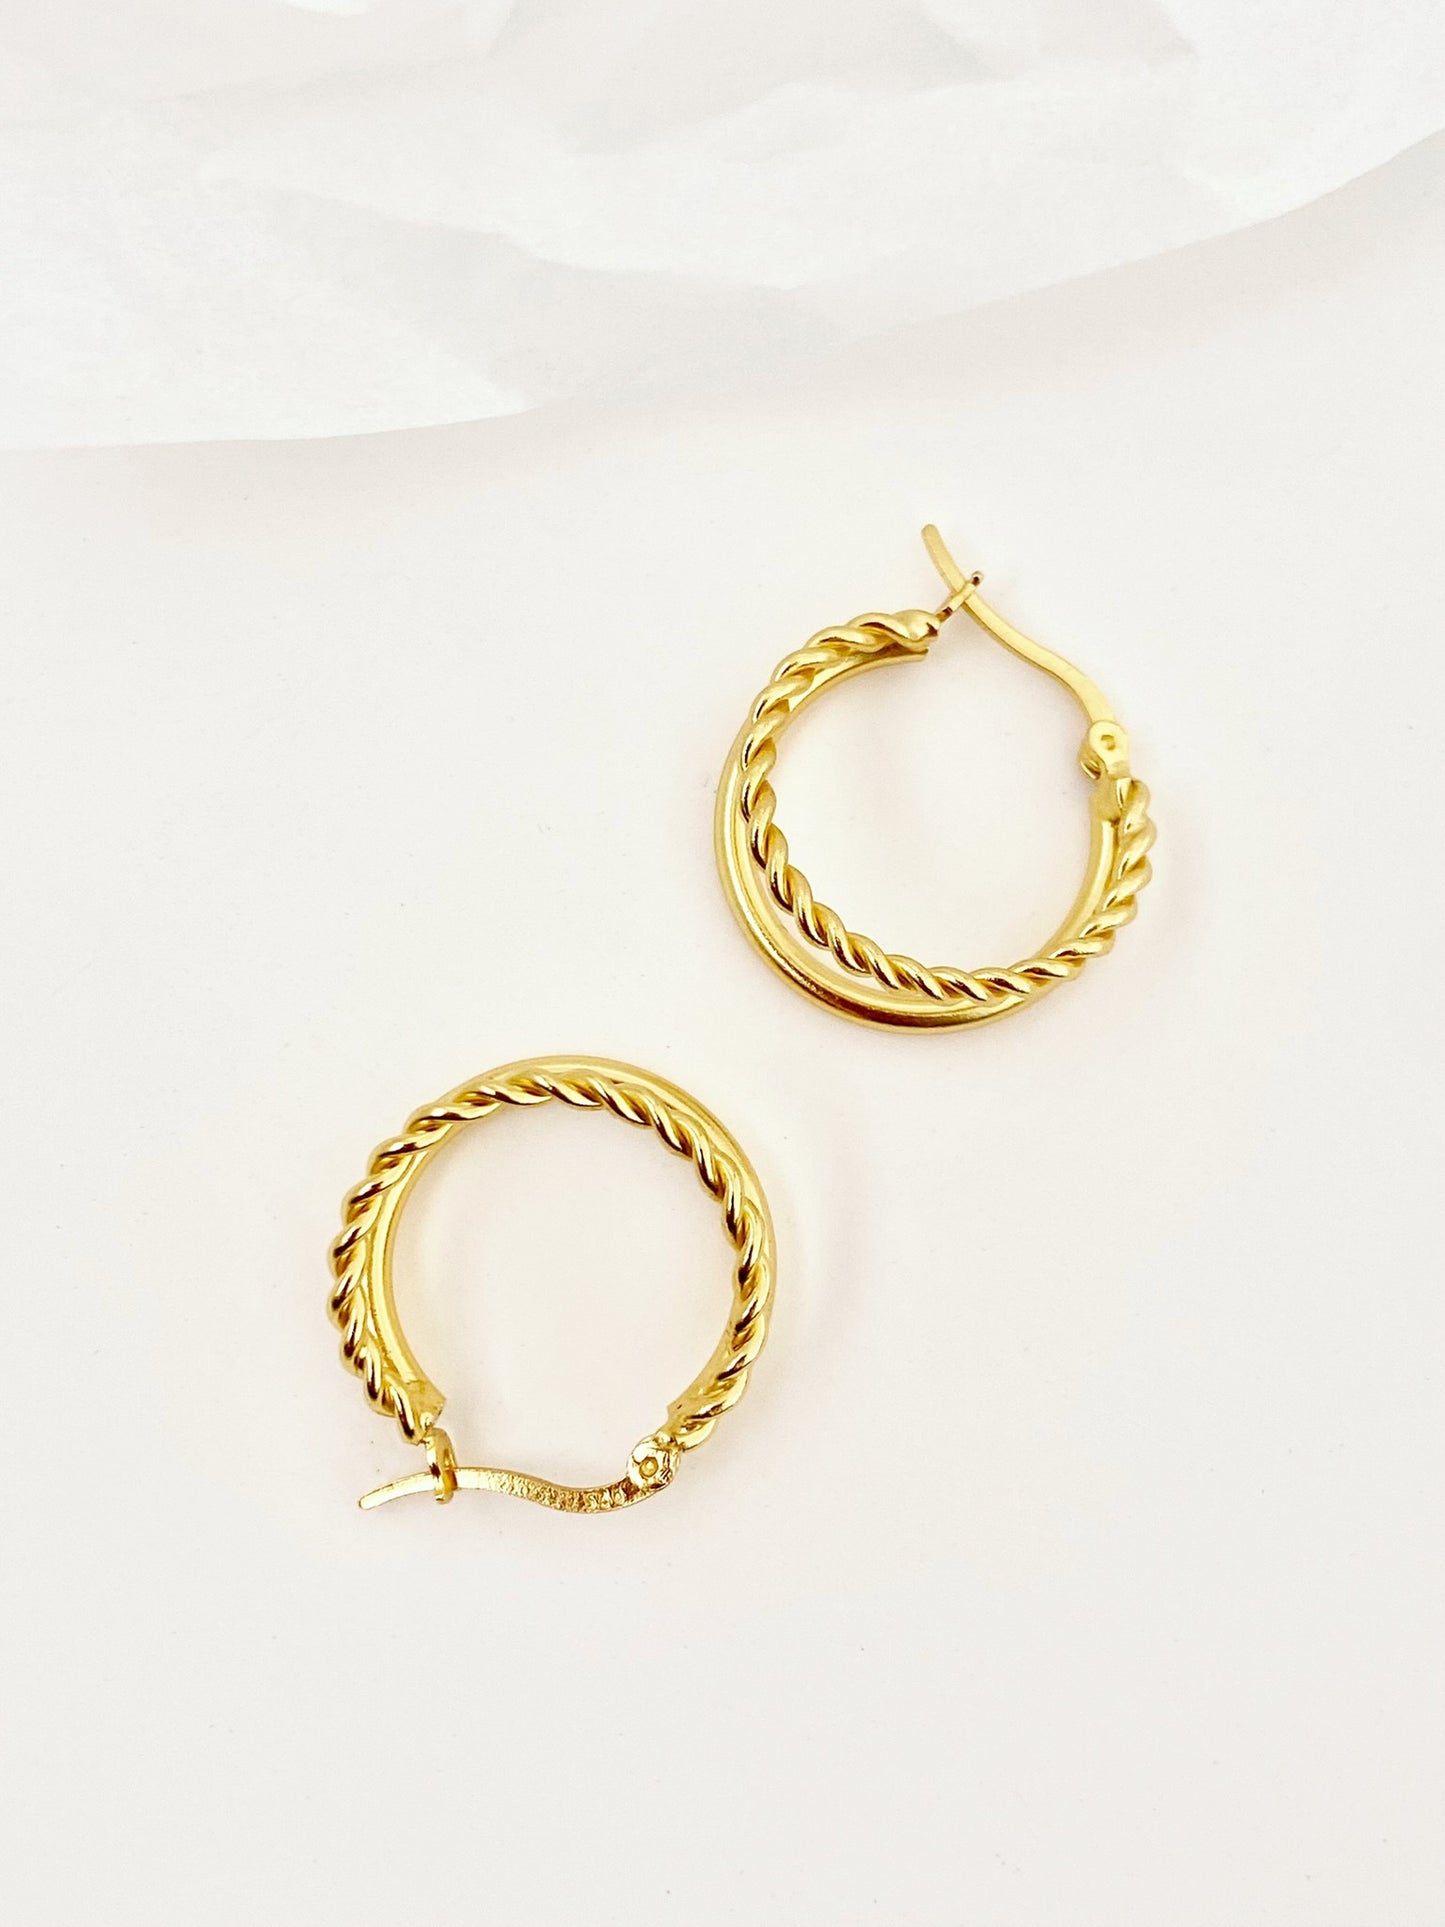 Gold Chunky Bold Twisted Rope Hoops Earring 